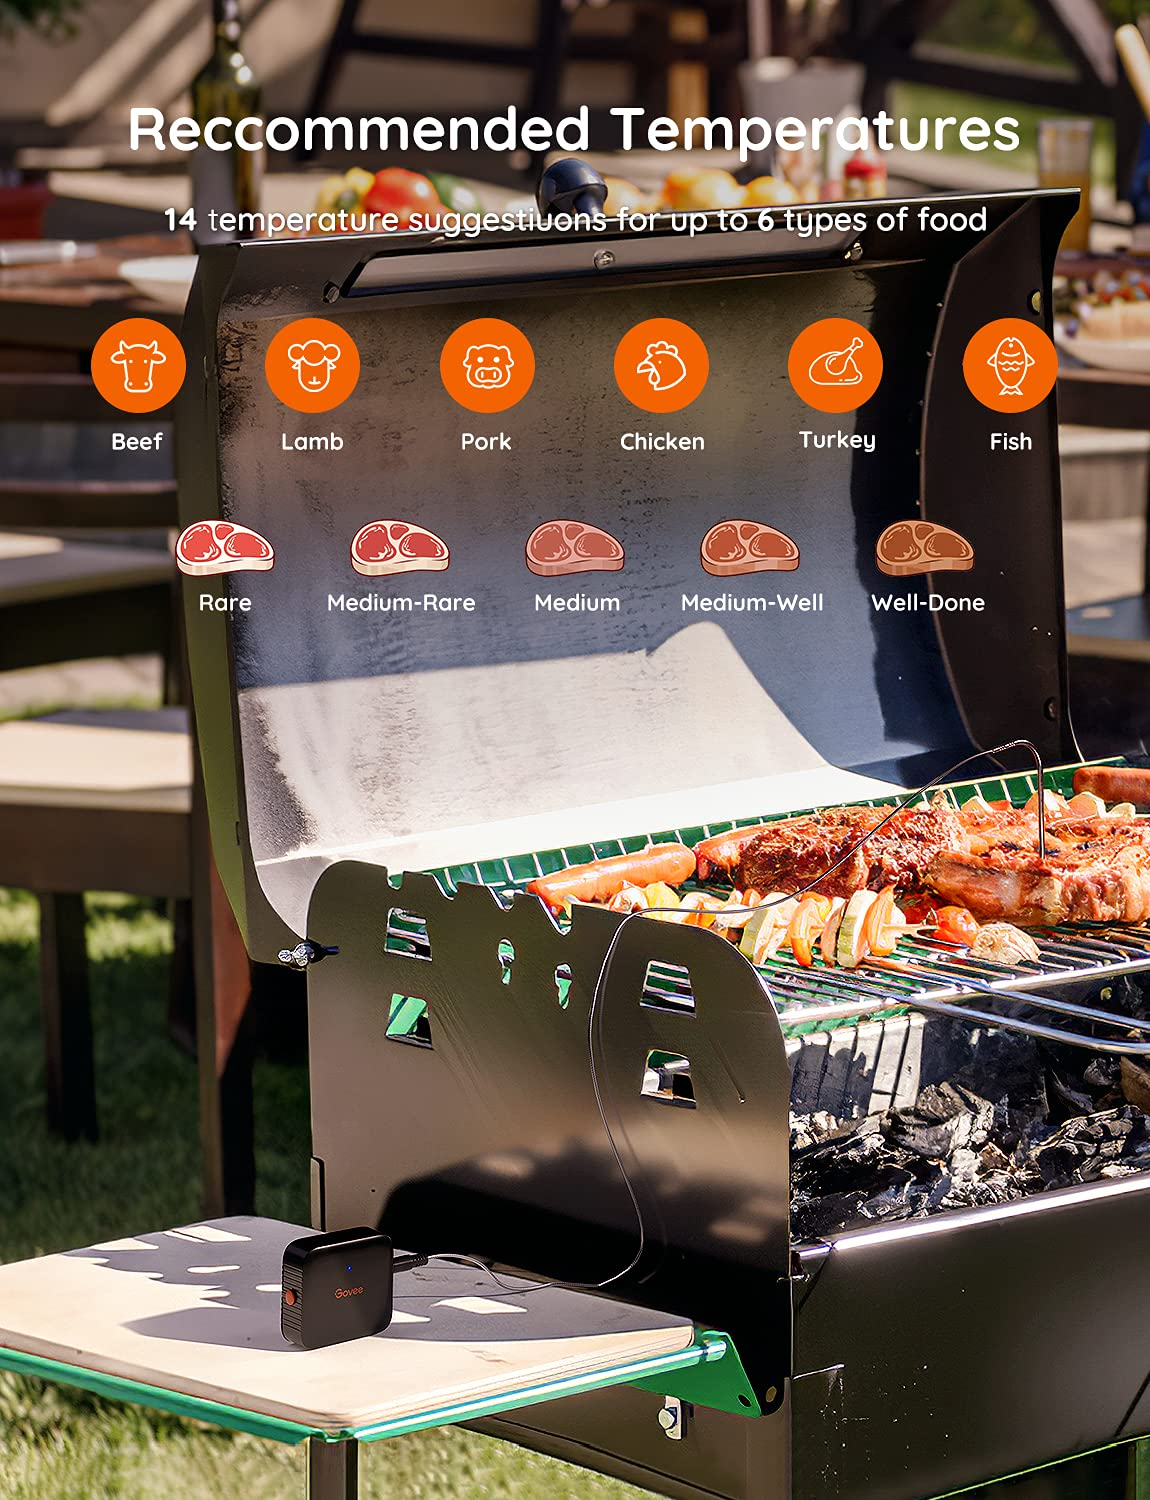 Govee Bluetooth meat cooking thermometer with probe with 70m wireless